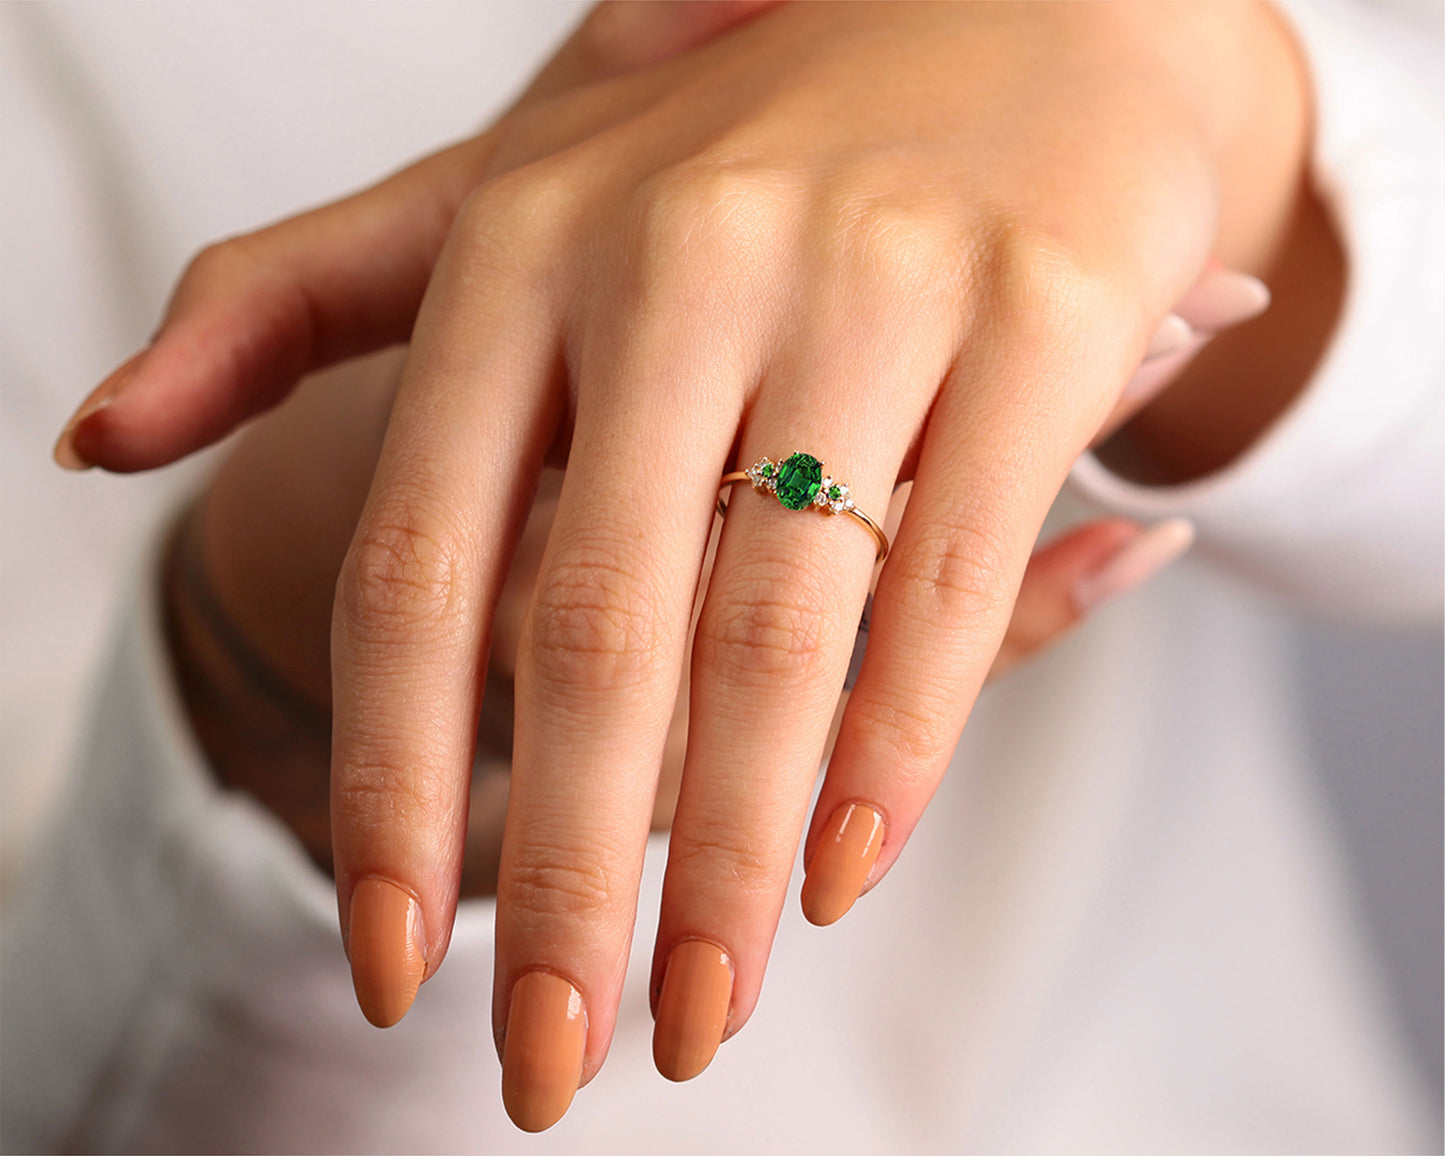 Multi Stone Ring in 14K Yellow Solid Gold Ring with Oval Cut Emerald with Cluster Setting Diamond Ring Dainty Gold Ring For Women